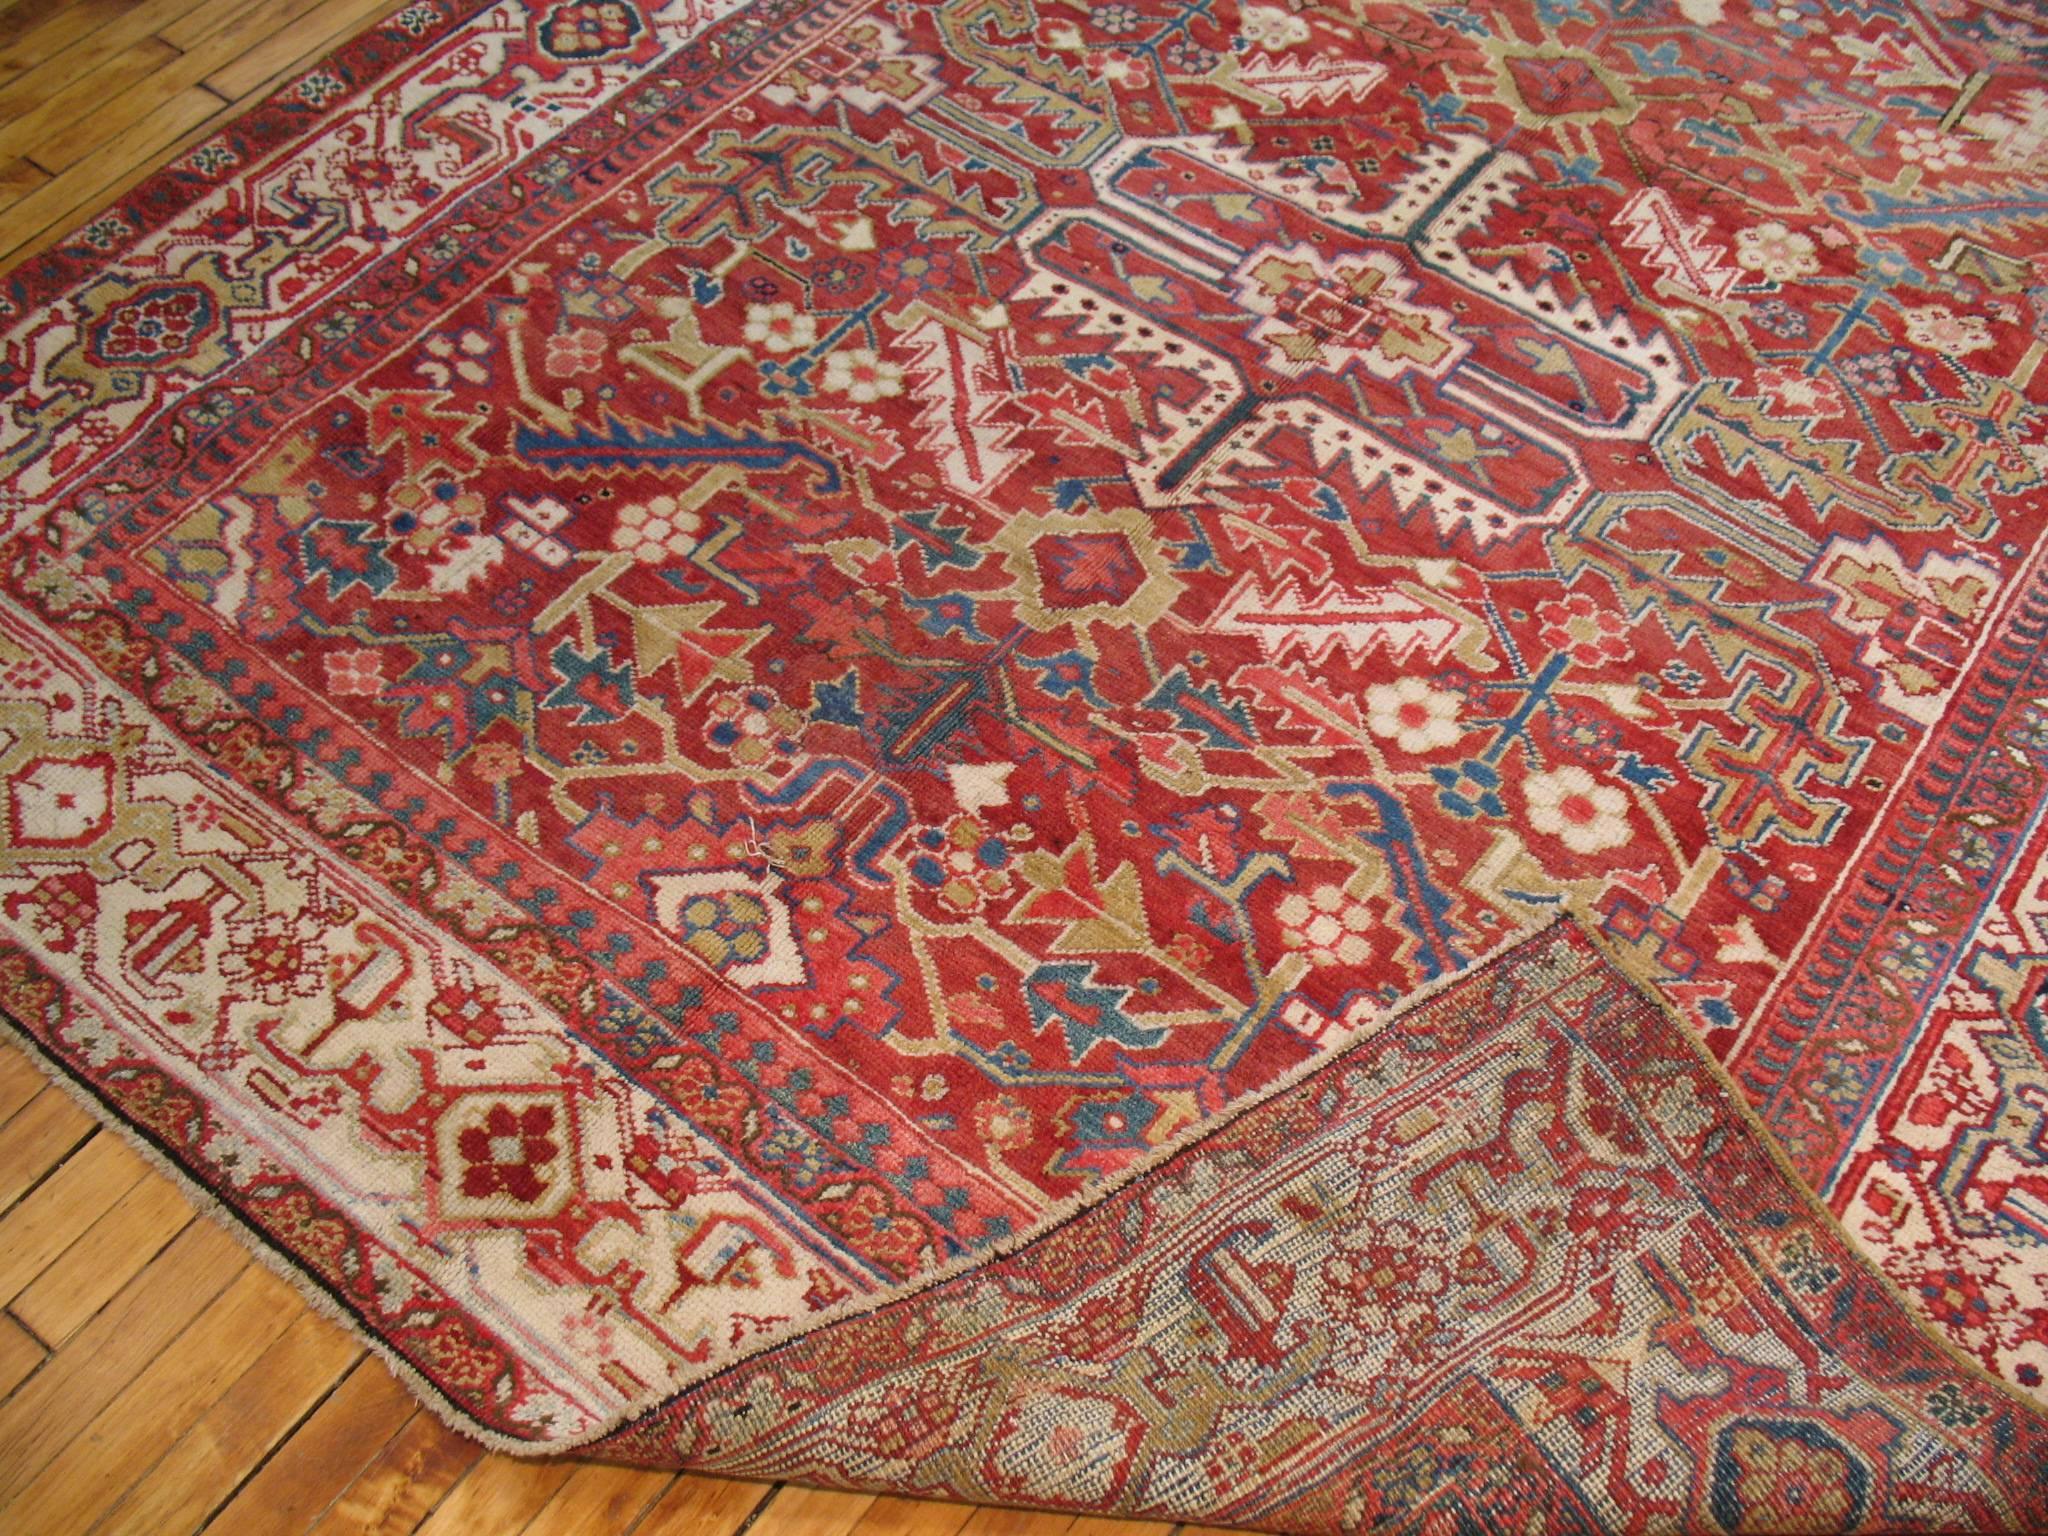 Rare size Persian Heriz carpet in predominant reds, ivory, icy blue and green. The field is a vivid red, the border is ivory. Full Pile Condition

7'3'' x 8'2'' circa 1920